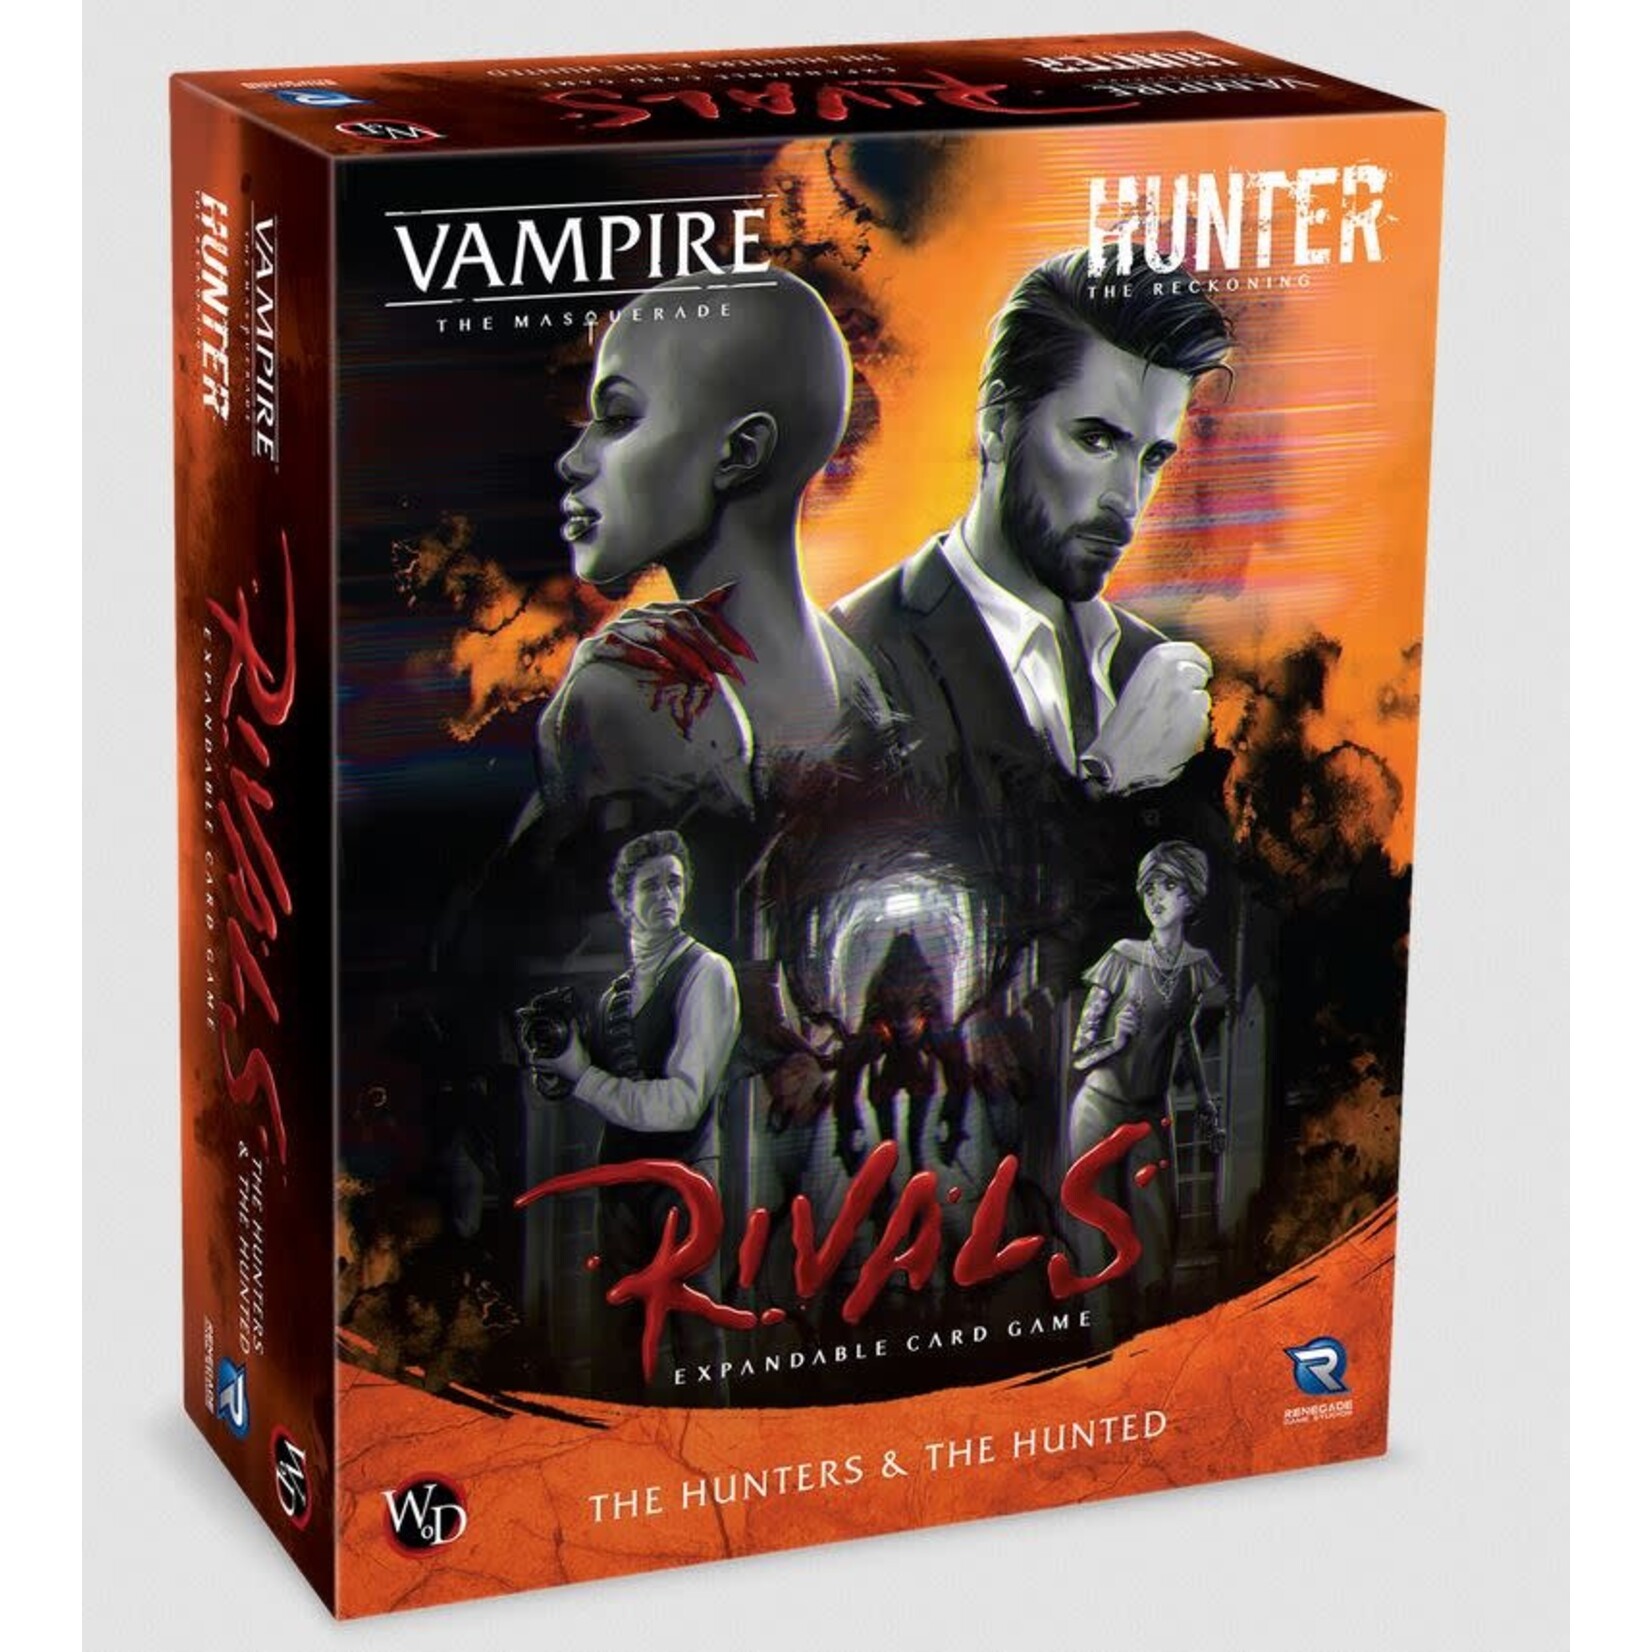 Vampire The Masquerade Rivals Expandable Card Game: The Hunters & The Hunted